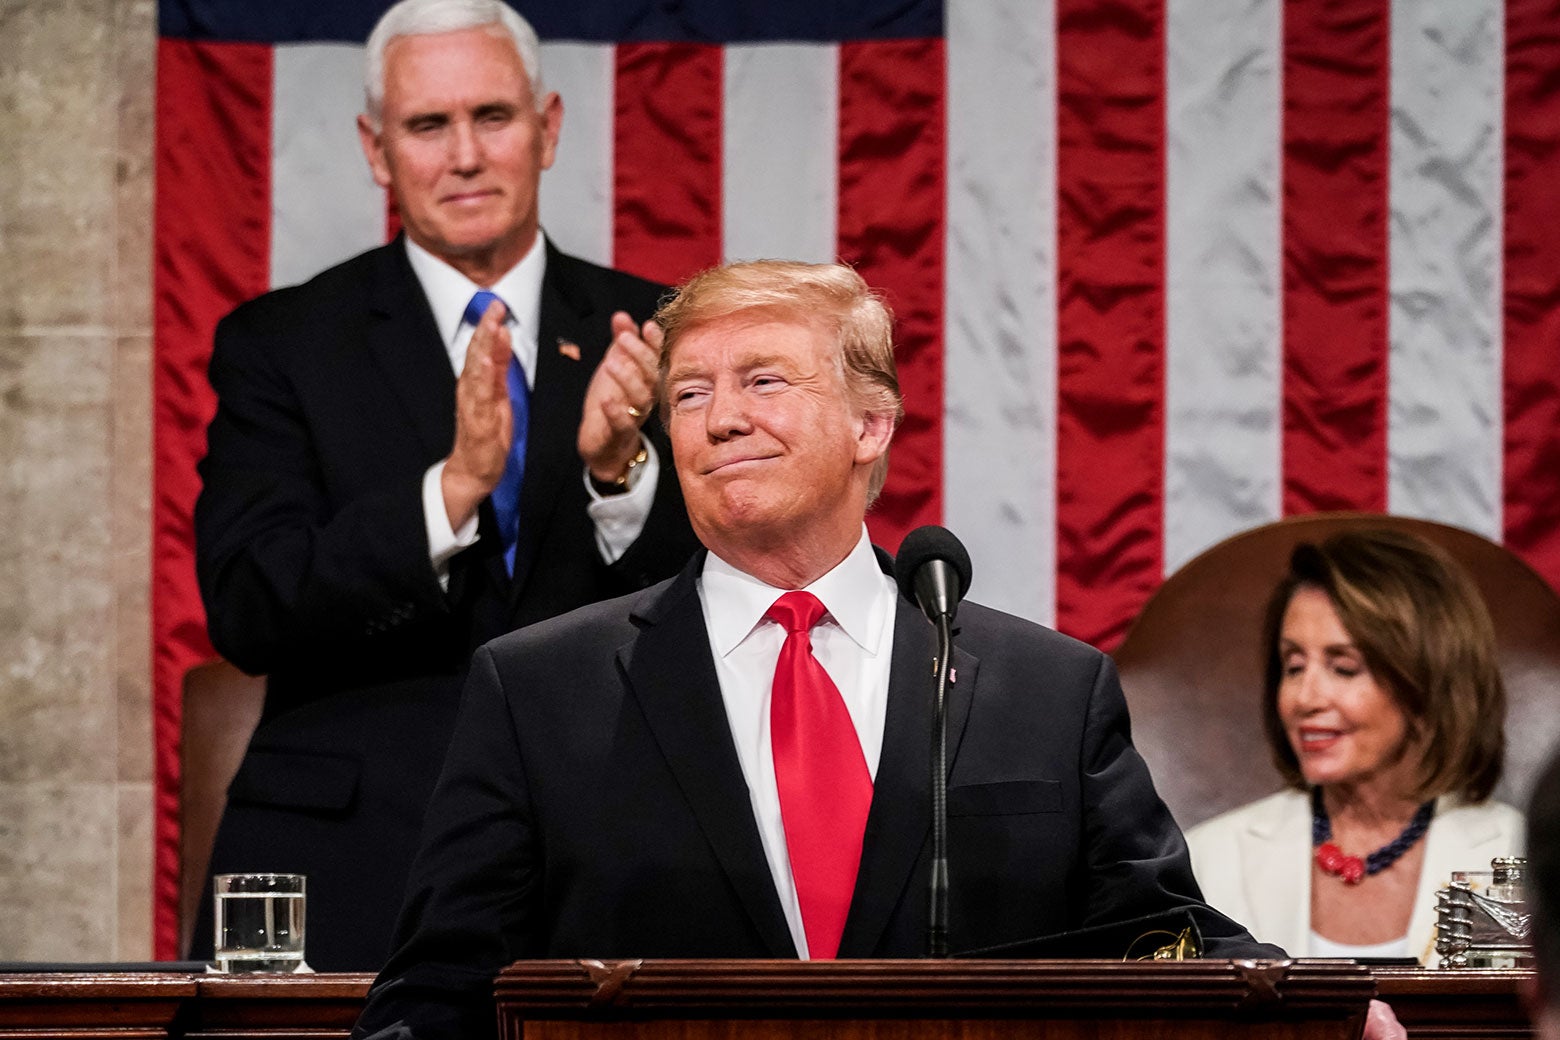 Donald Trump smiles as Mike Pence stands to applaud. Nancy Pelosi is seated and smiling.